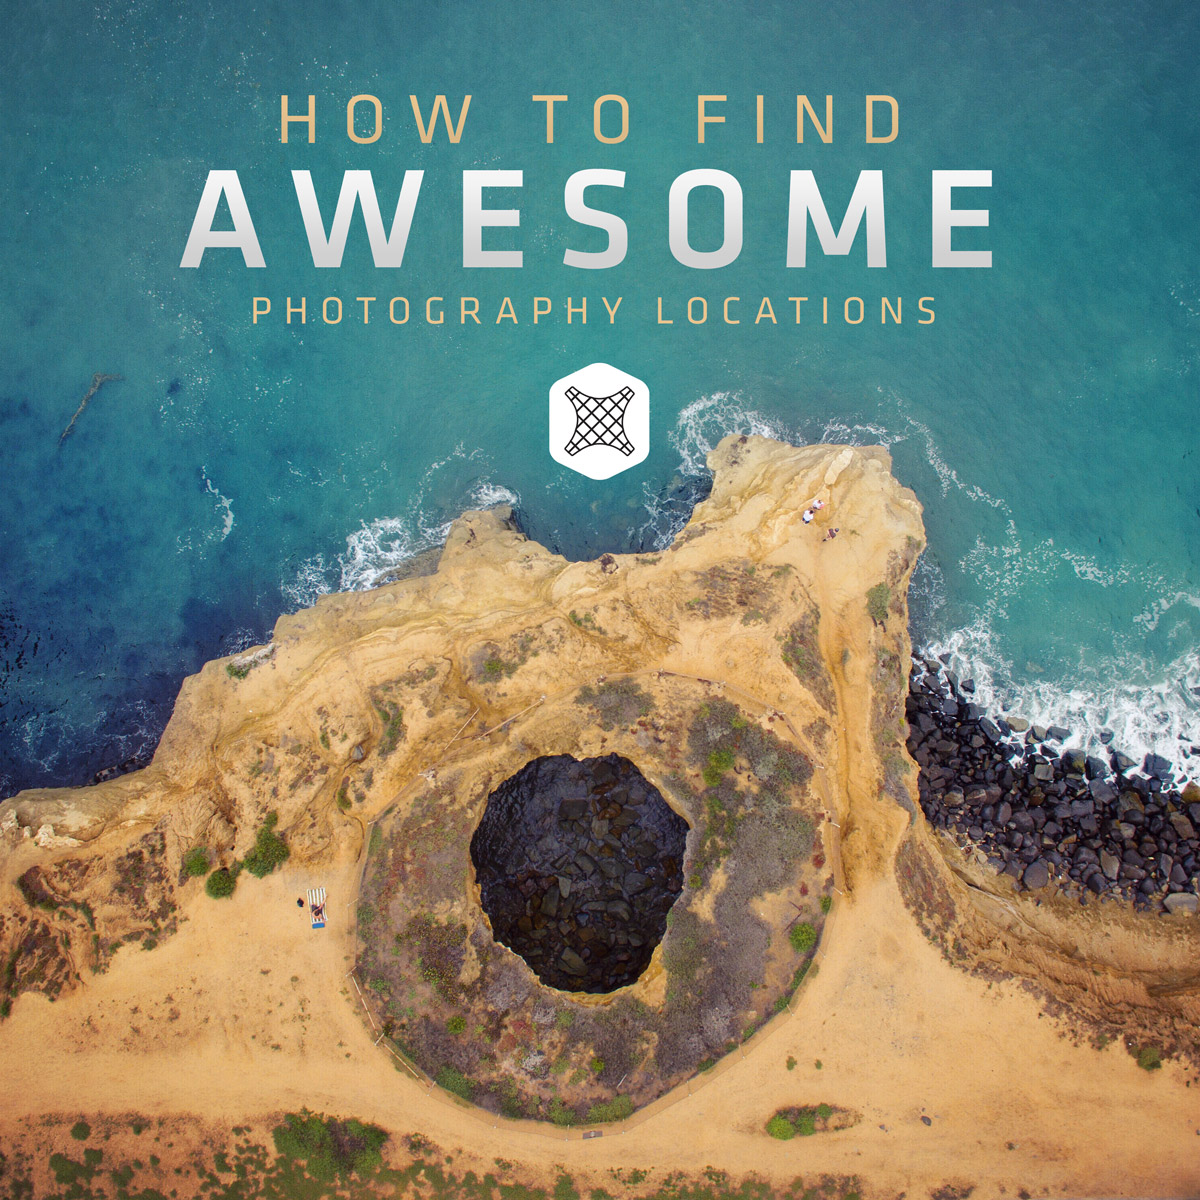 How to find awesome photography locations